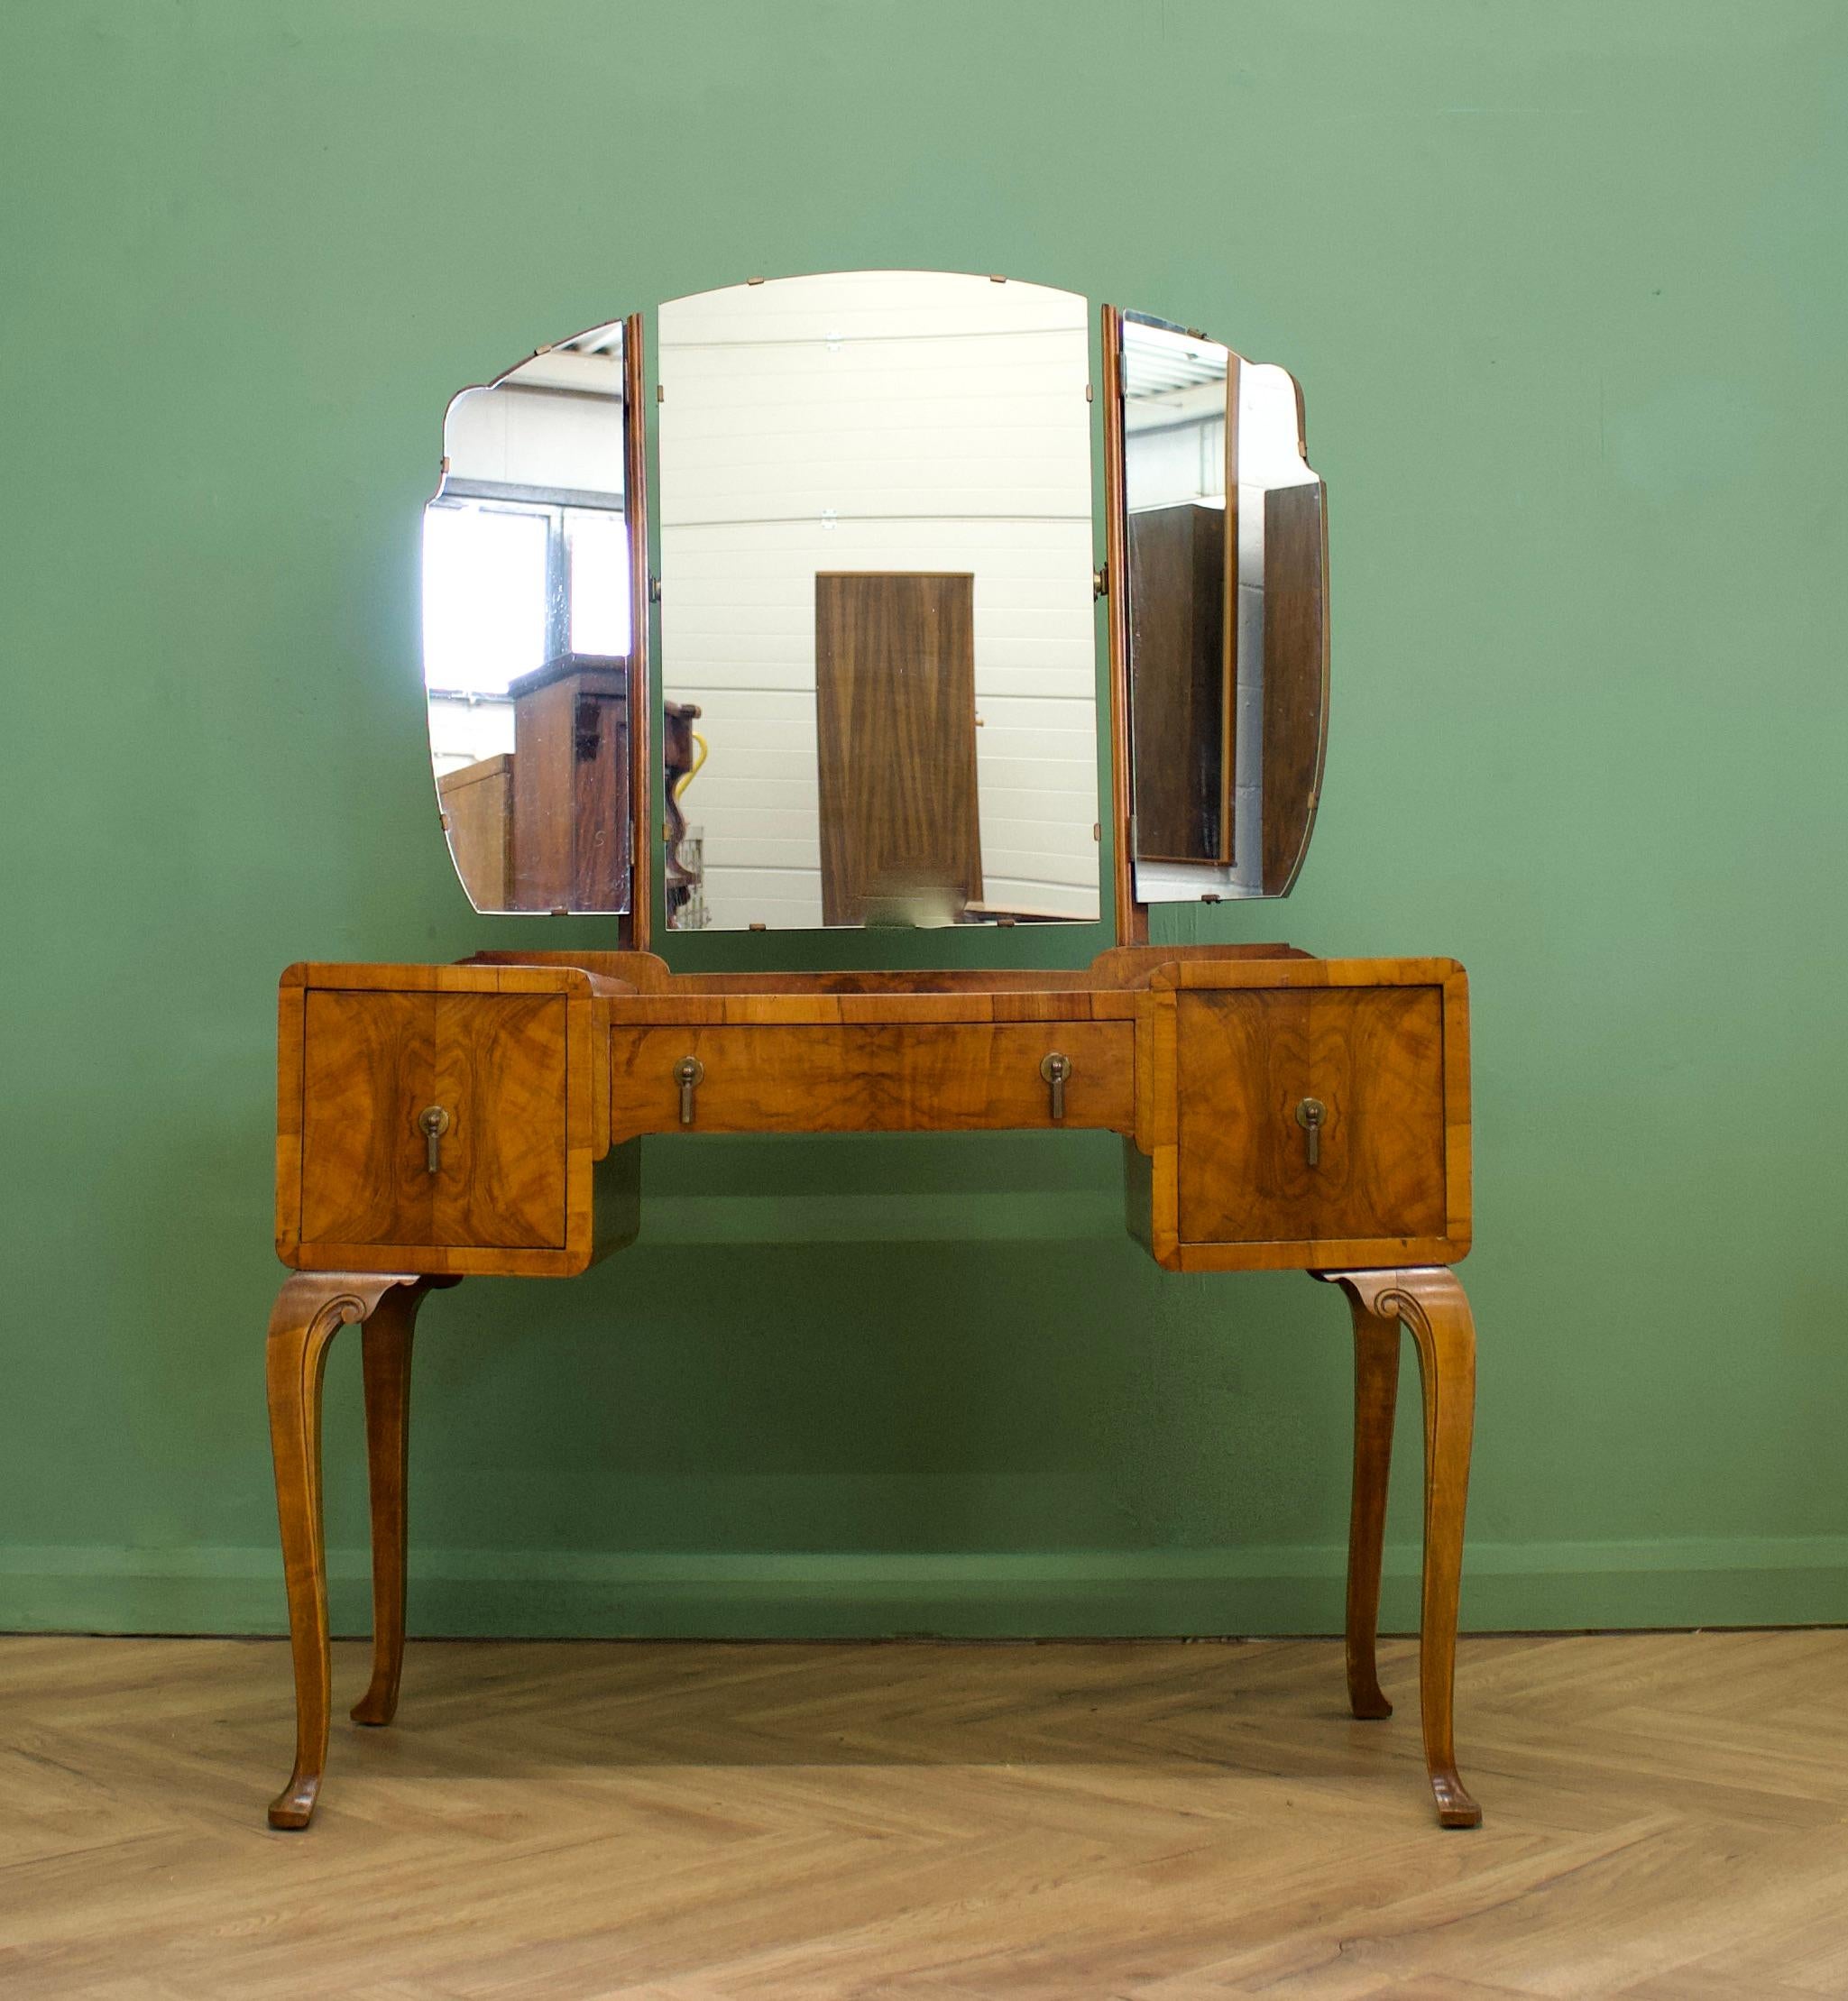 1930's Walnut Dressing Table

An impressive quality 1930s Deco dressing table
Very similar in style and quality to Waring and Gillow

Featuring three drawers and a triptych mirror

Height to top of the mirror is 149cm.